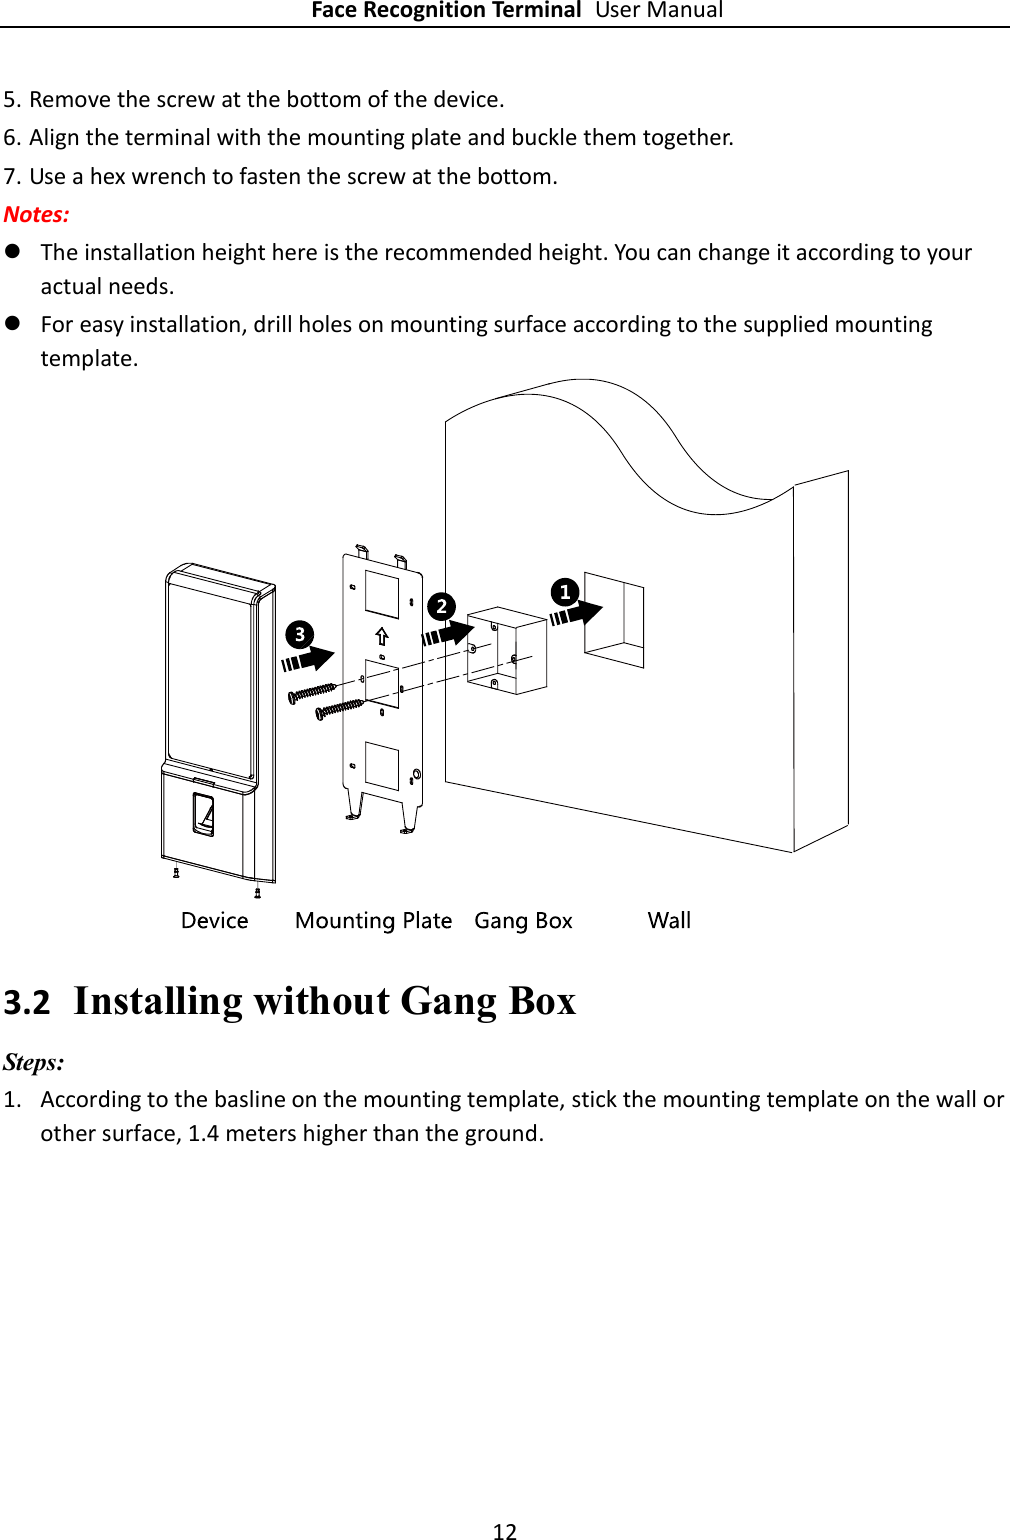 Page 13 of Hangzhou Hikvision Digital Technology K1T604 Face Recognition Terminal User Manual 